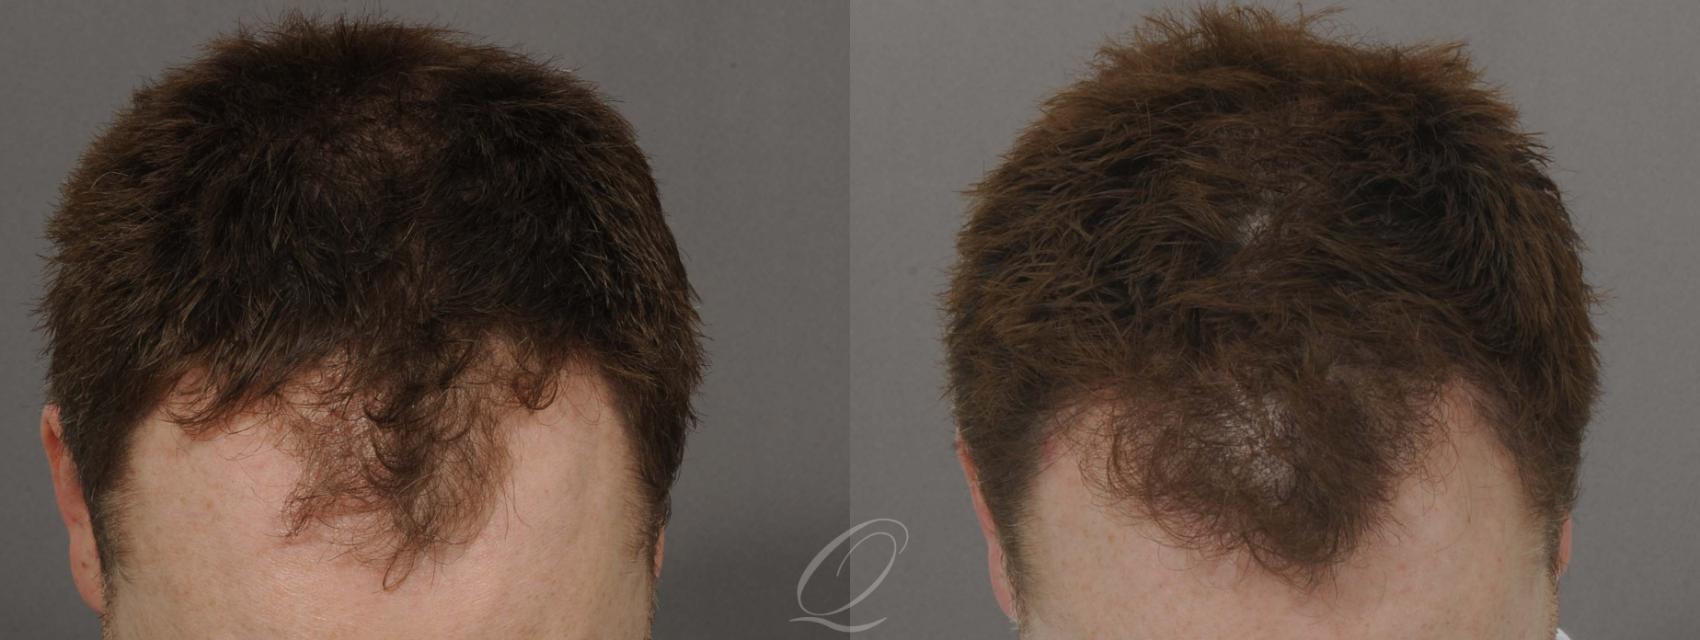 FUT Case 1027 Before & After View #1 | Rochester, NY | Quatela Center for Hair Restoration